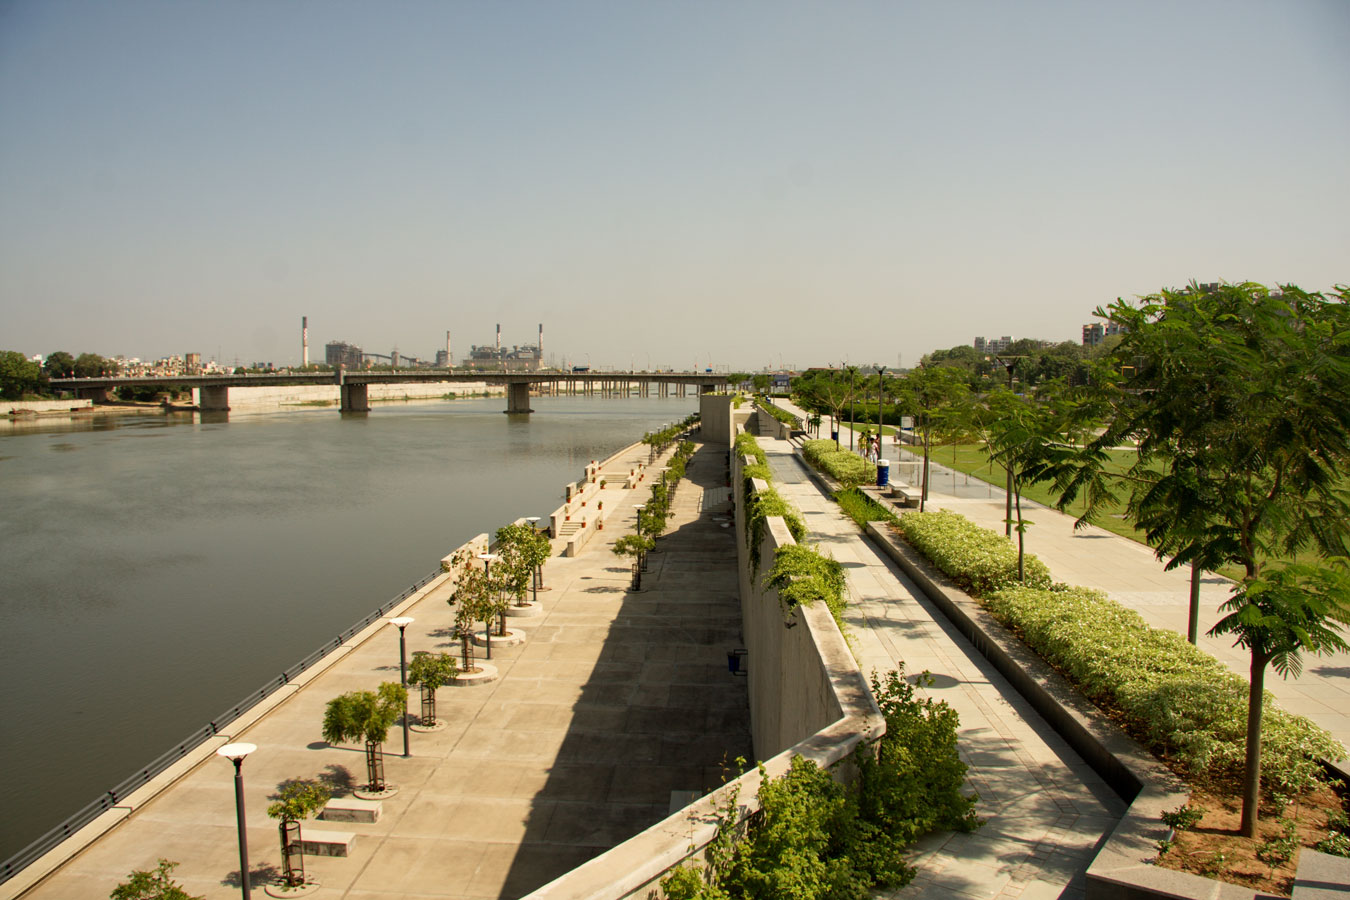 Highly polluted in downstream, Sabarmati riverfront cannot be